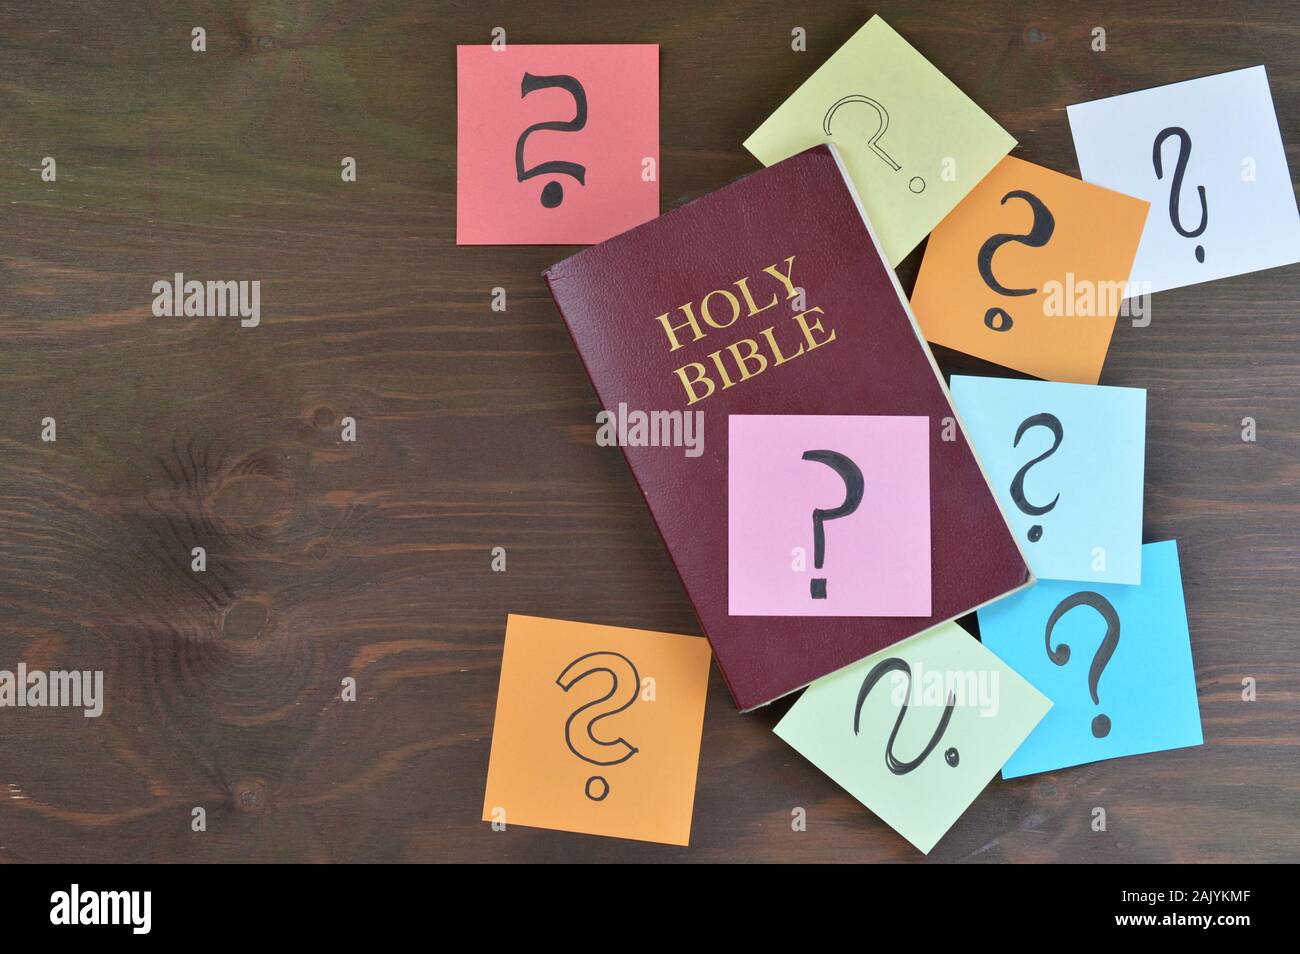 Holy bible and colorful note pads with question marks on brown wood Stock Photo